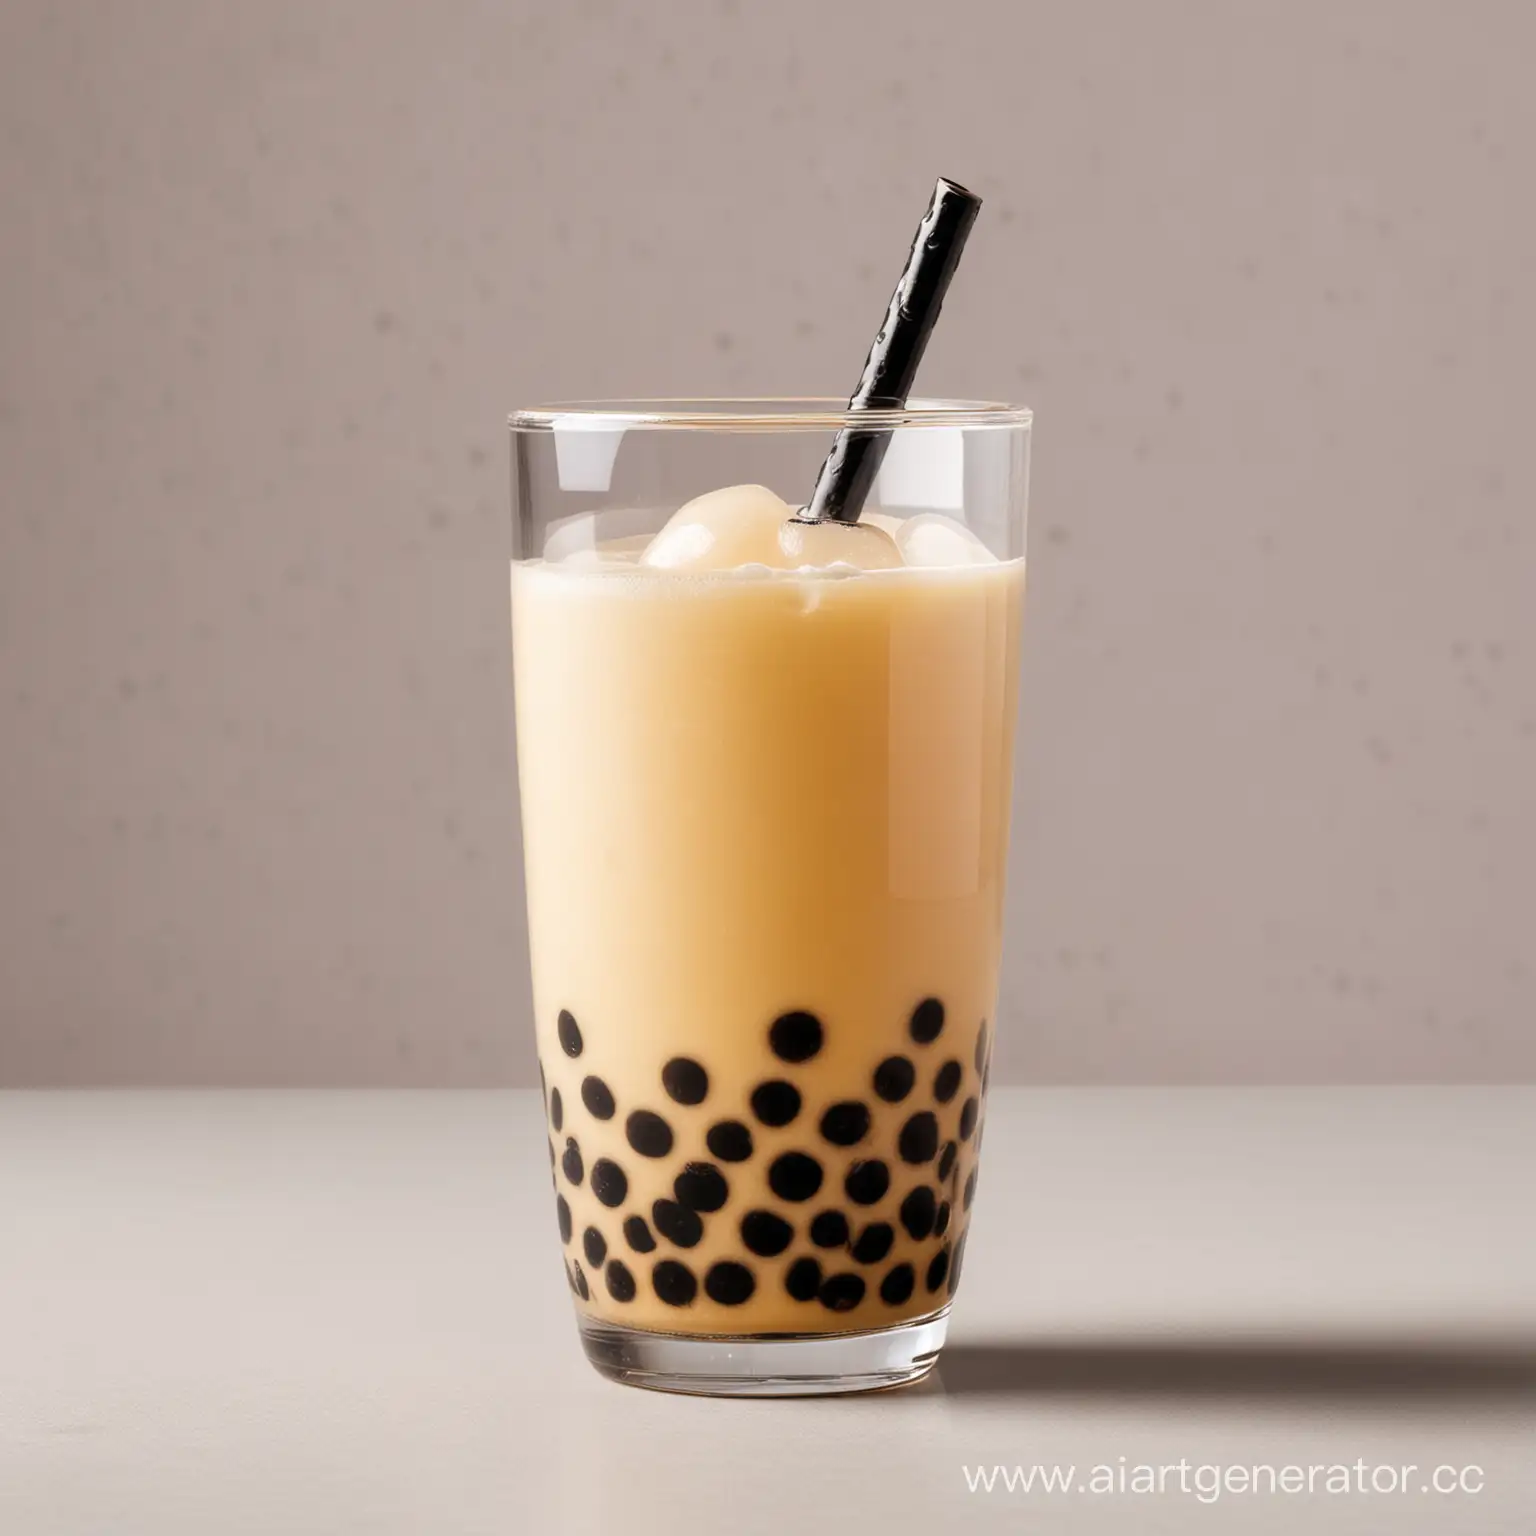 Single-Glass-of-Bubble-Tea-with-Tapioca-Pearls-on-Plain-Background-Online-Store-Product-Photo